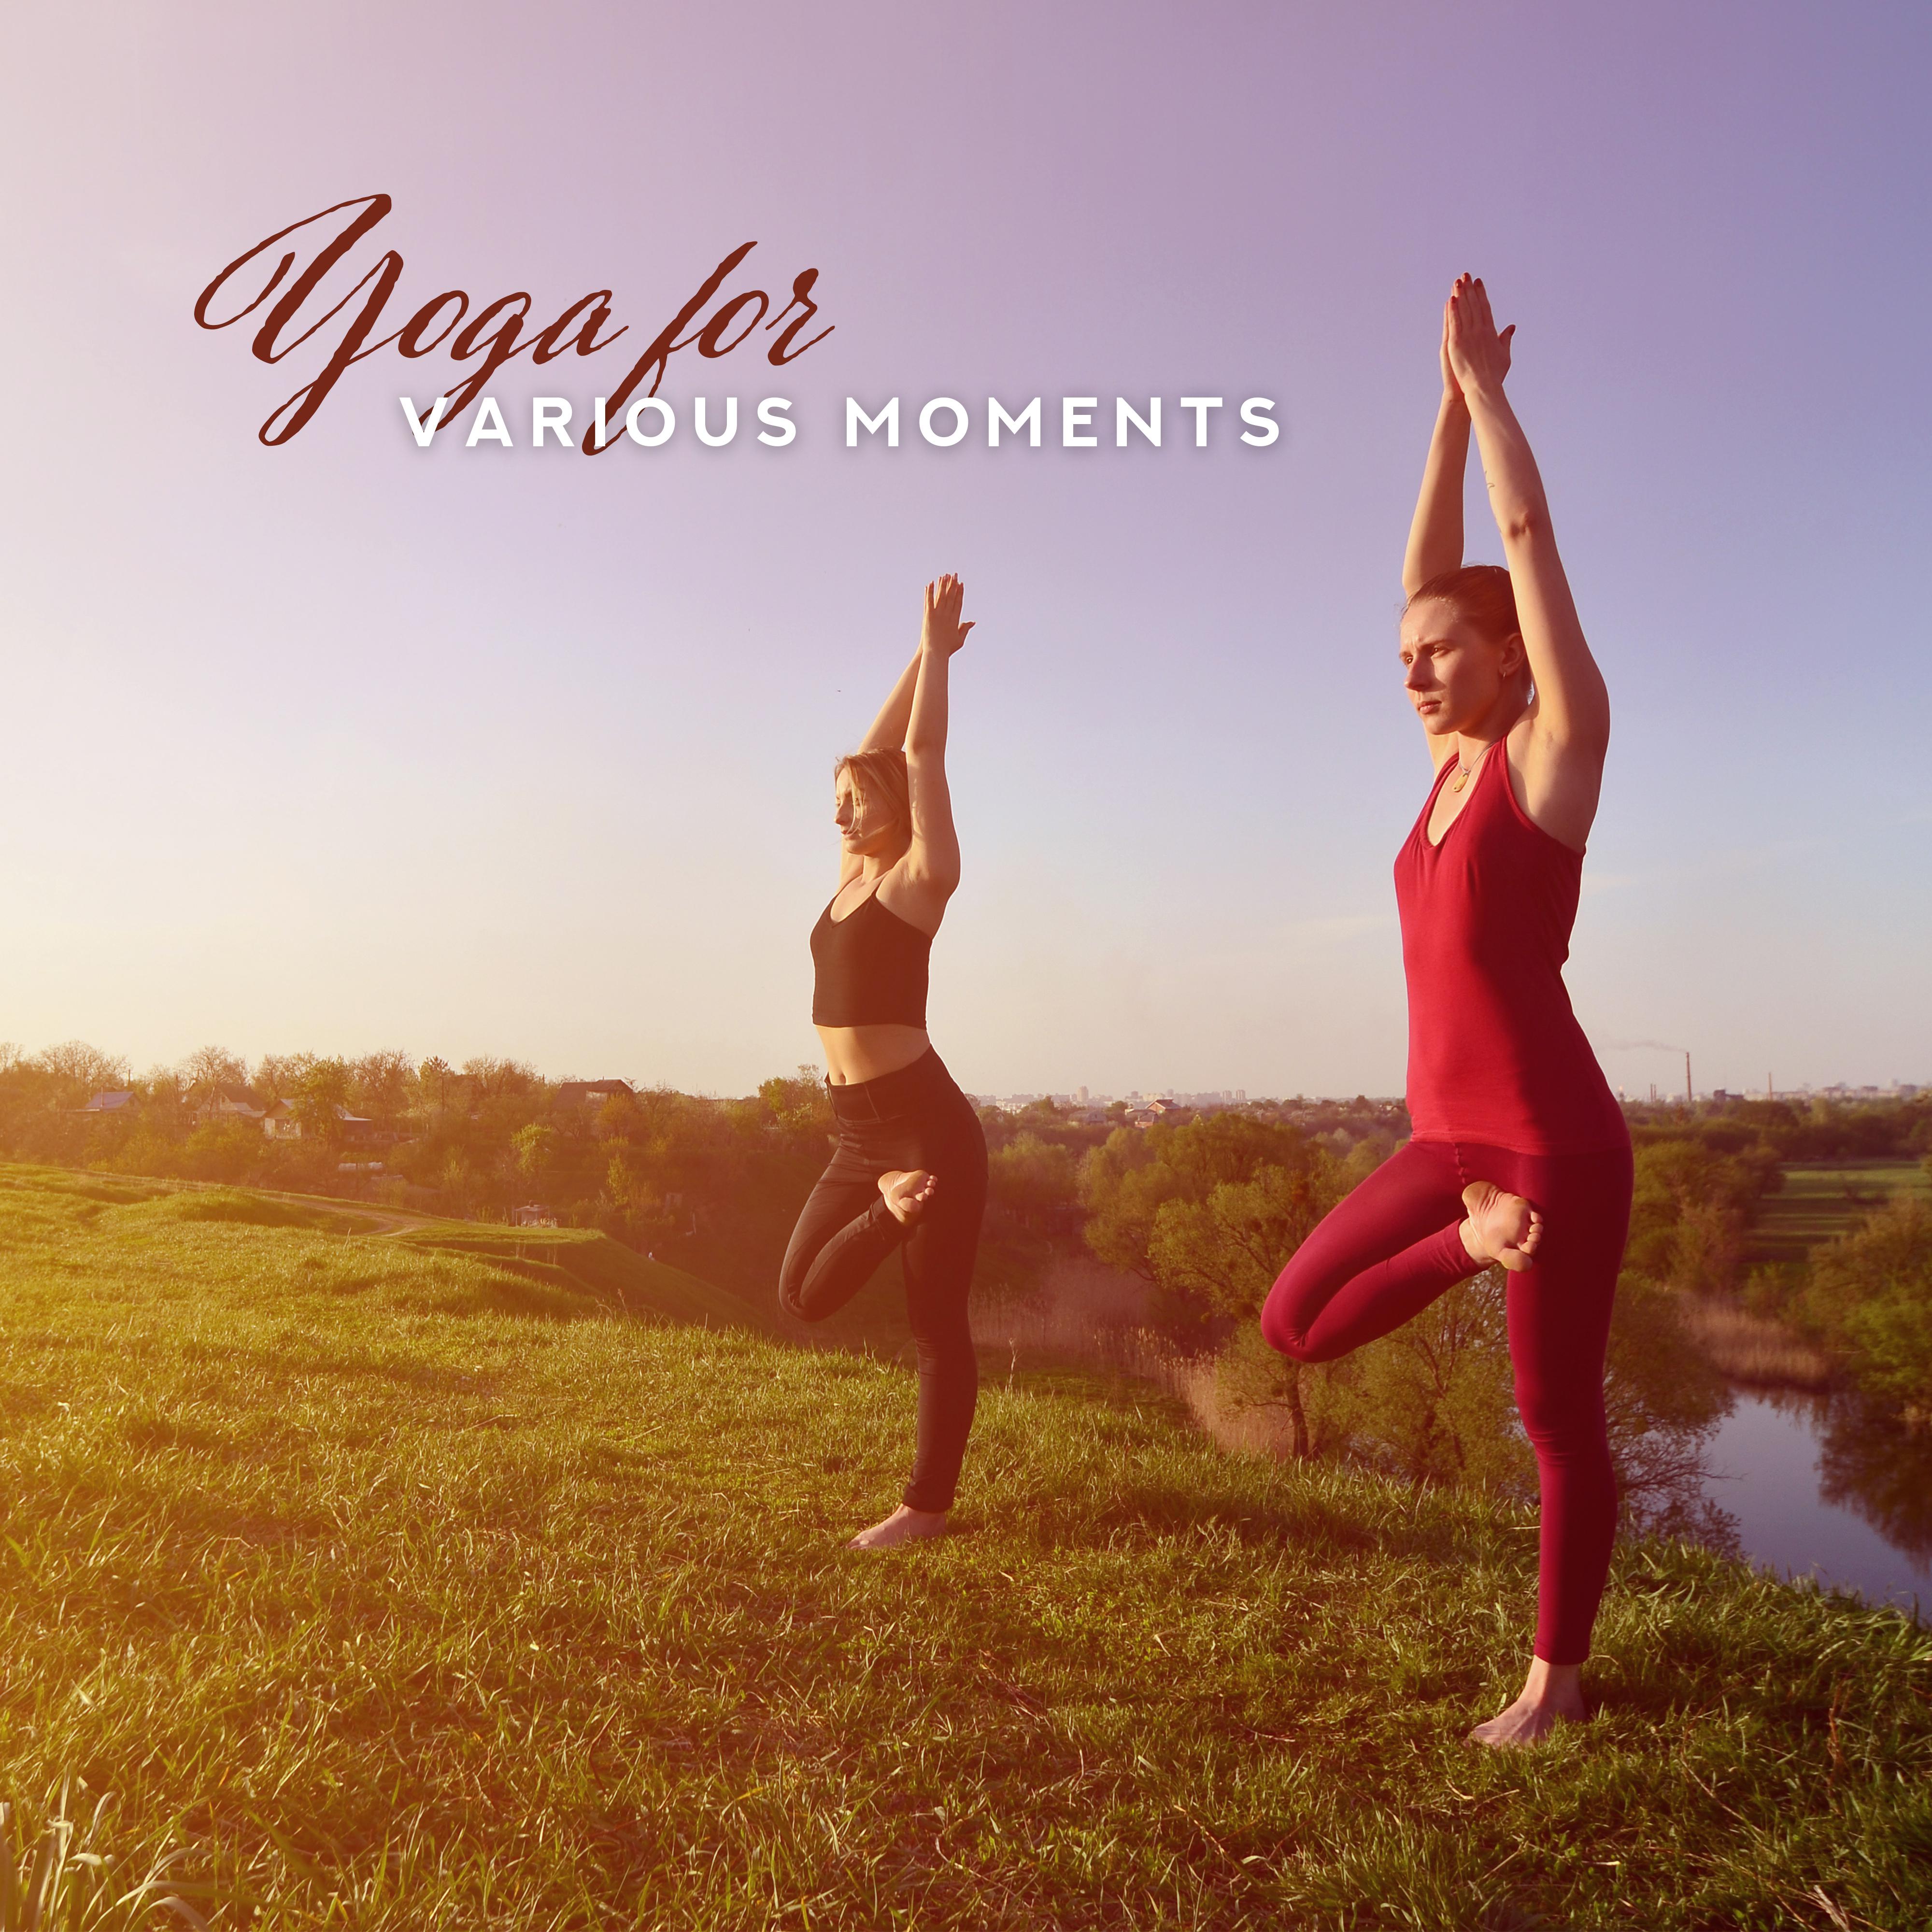 Yoga for Various Moments: 2019 Ambient New Age for Meditation & Relaxation in Different Occasions